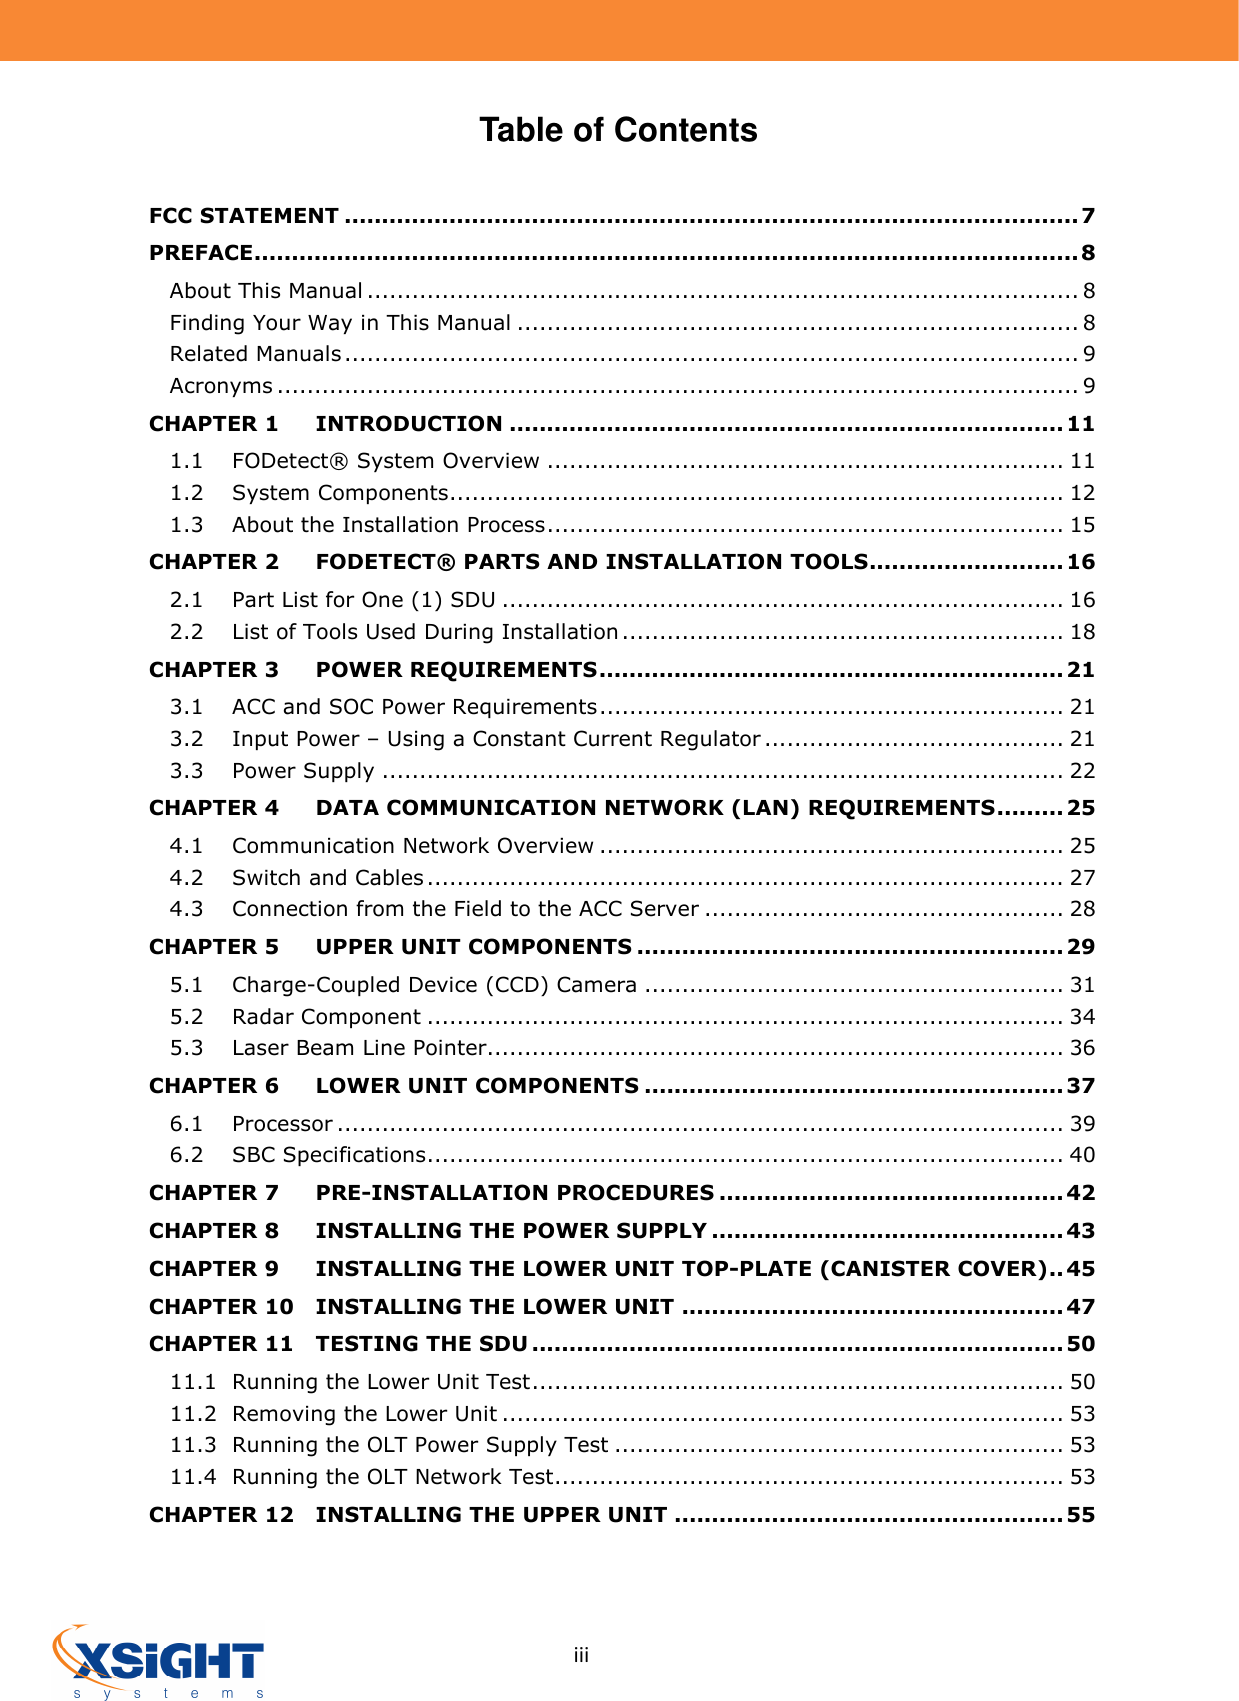     iii Table of Contents  FCC STATEMENT .................................................................................................. 7 PREFACE .............................................................................................................. 8 About This Manual ............................................................................................... 8 Finding Your Way in This Manual ........................................................................... 8 Related Manuals .................................................................................................. 9 Acronyms ........................................................................................................... 9 CHAPTER 1 INTRODUCTION .......................................................................... 11 1.1 FODetect® System Overview ..................................................................... 11 1.2 System Components .................................................................................. 12 1.3 About the Installation Process ..................................................................... 15 CHAPTER 2 FODETECT® PARTS AND INSTALLATION TOOLS .......................... 16 2.1 Part List for One (1) SDU ........................................................................... 16 2.2 List of Tools Used During Installation ........................................................... 18 CHAPTER 3 POWER REQUIREMENTS .............................................................. 21 3.1 ACC and SOC Power Requirements .............................................................. 21 3.2 Input Power – Using a Constant Current Regulator ........................................ 21 3.3 Power Supply ........................................................................................... 22 CHAPTER 4 DATA COMMUNICATION NETWORK (LAN) REQUIREMENTS ......... 25 4.1 Communication Network Overview .............................................................. 25 4.2 Switch and Cables ..................................................................................... 27 4.3 Connection from the Field to the ACC Server ................................................ 28 CHAPTER 5 UPPER UNIT COMPONENTS ......................................................... 29 5.1 Charge-Coupled Device (CCD) Camera ........................................................ 31 5.2 Radar Component ..................................................................................... 34 5.3 Laser Beam Line Pointer............................................................................. 36 CHAPTER 6 LOWER UNIT COMPONENTS ........................................................ 37 6.1 Processor ................................................................................................. 39 6.2 SBC Specifications ..................................................................................... 40 CHAPTER 7 PRE-INSTALLATION PROCEDURES .............................................. 42 CHAPTER 8 INSTALLING THE POWER SUPPLY ............................................... 43 CHAPTER 9 INSTALLING THE LOWER UNIT TOP-PLATE (CANISTER COVER) .. 45 CHAPTER 10 INSTALLING THE LOWER UNIT ................................................... 47 CHAPTER 11 TESTING THE SDU ....................................................................... 50 11.1 Running the Lower Unit Test ....................................................................... 50 11.2 Removing the Lower Unit ........................................................................... 53 11.3 Running the OLT Power Supply Test ............................................................ 53 11.4 Running the OLT Network Test .................................................................... 53 CHAPTER 12 INSTALLING THE UPPER UNIT .................................................... 55   